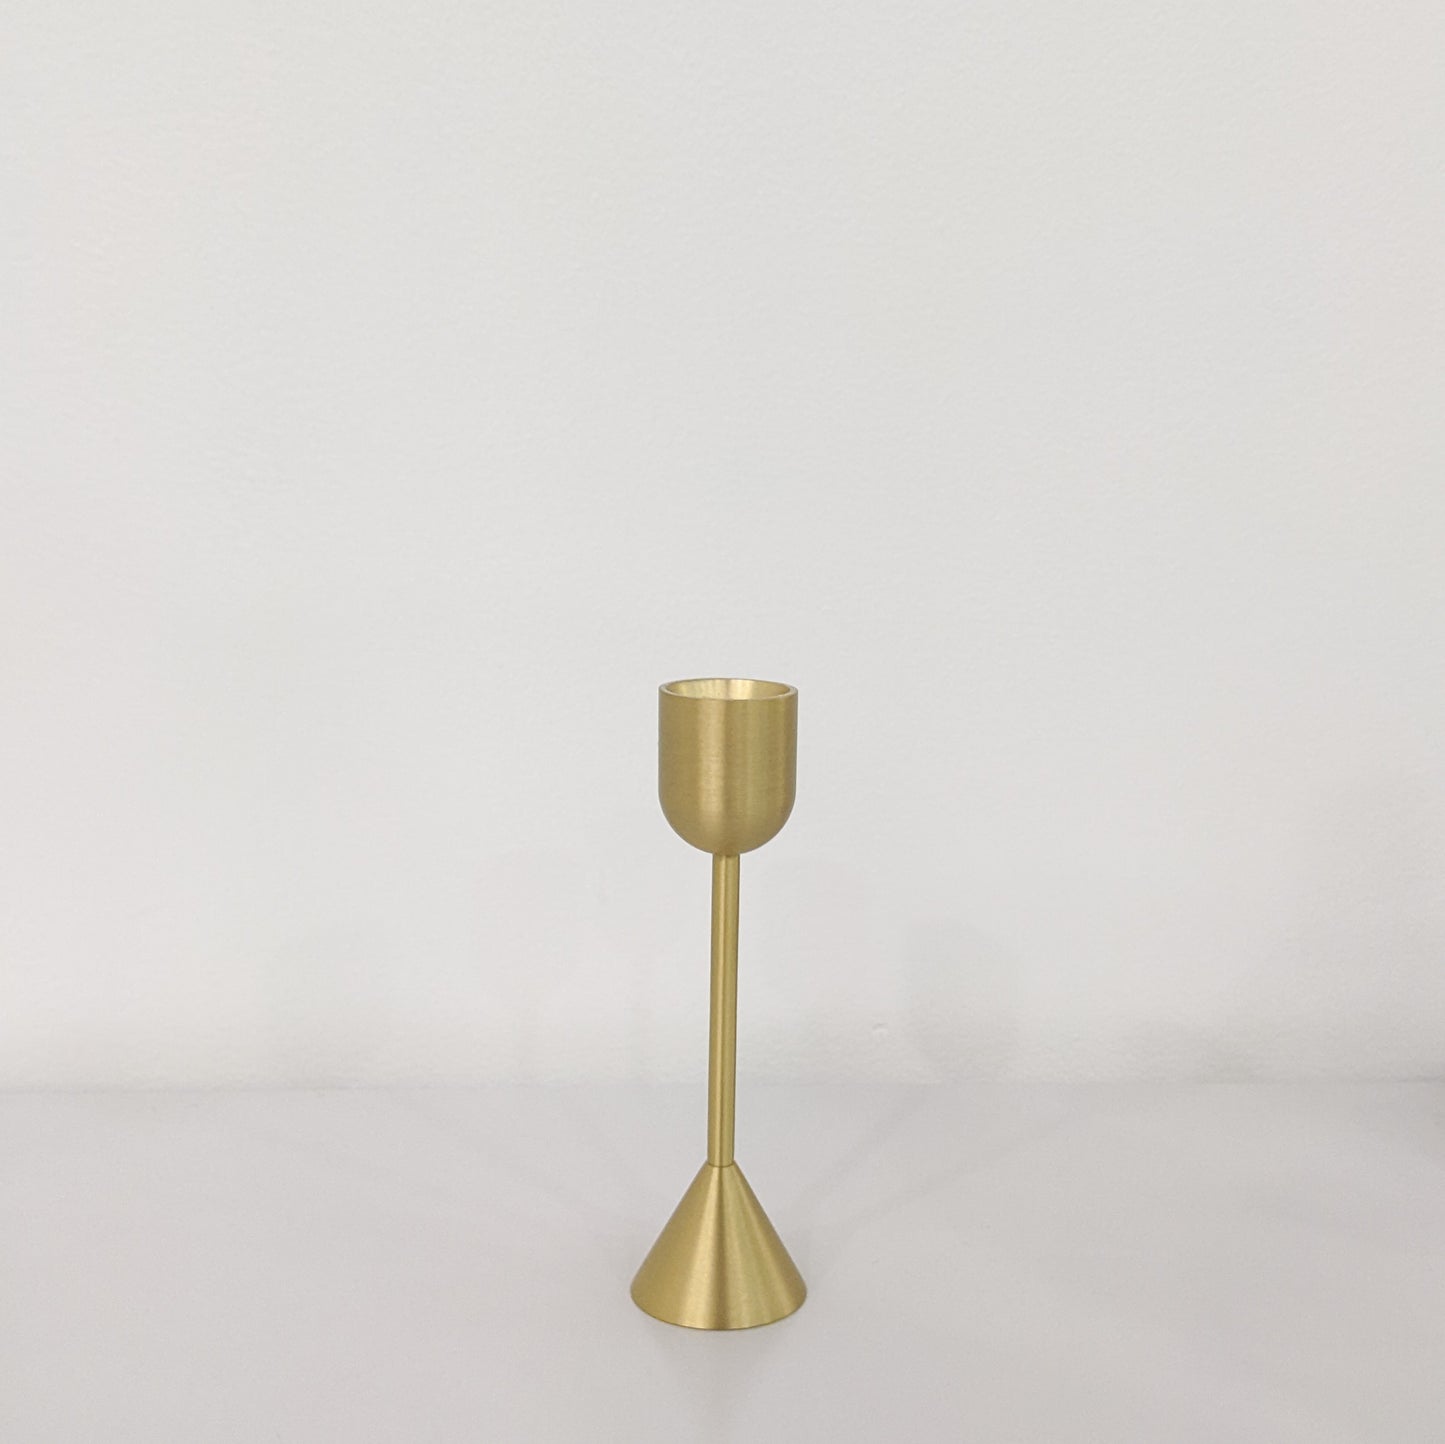 Simple and stylish brass candlestick holder to elevate any space